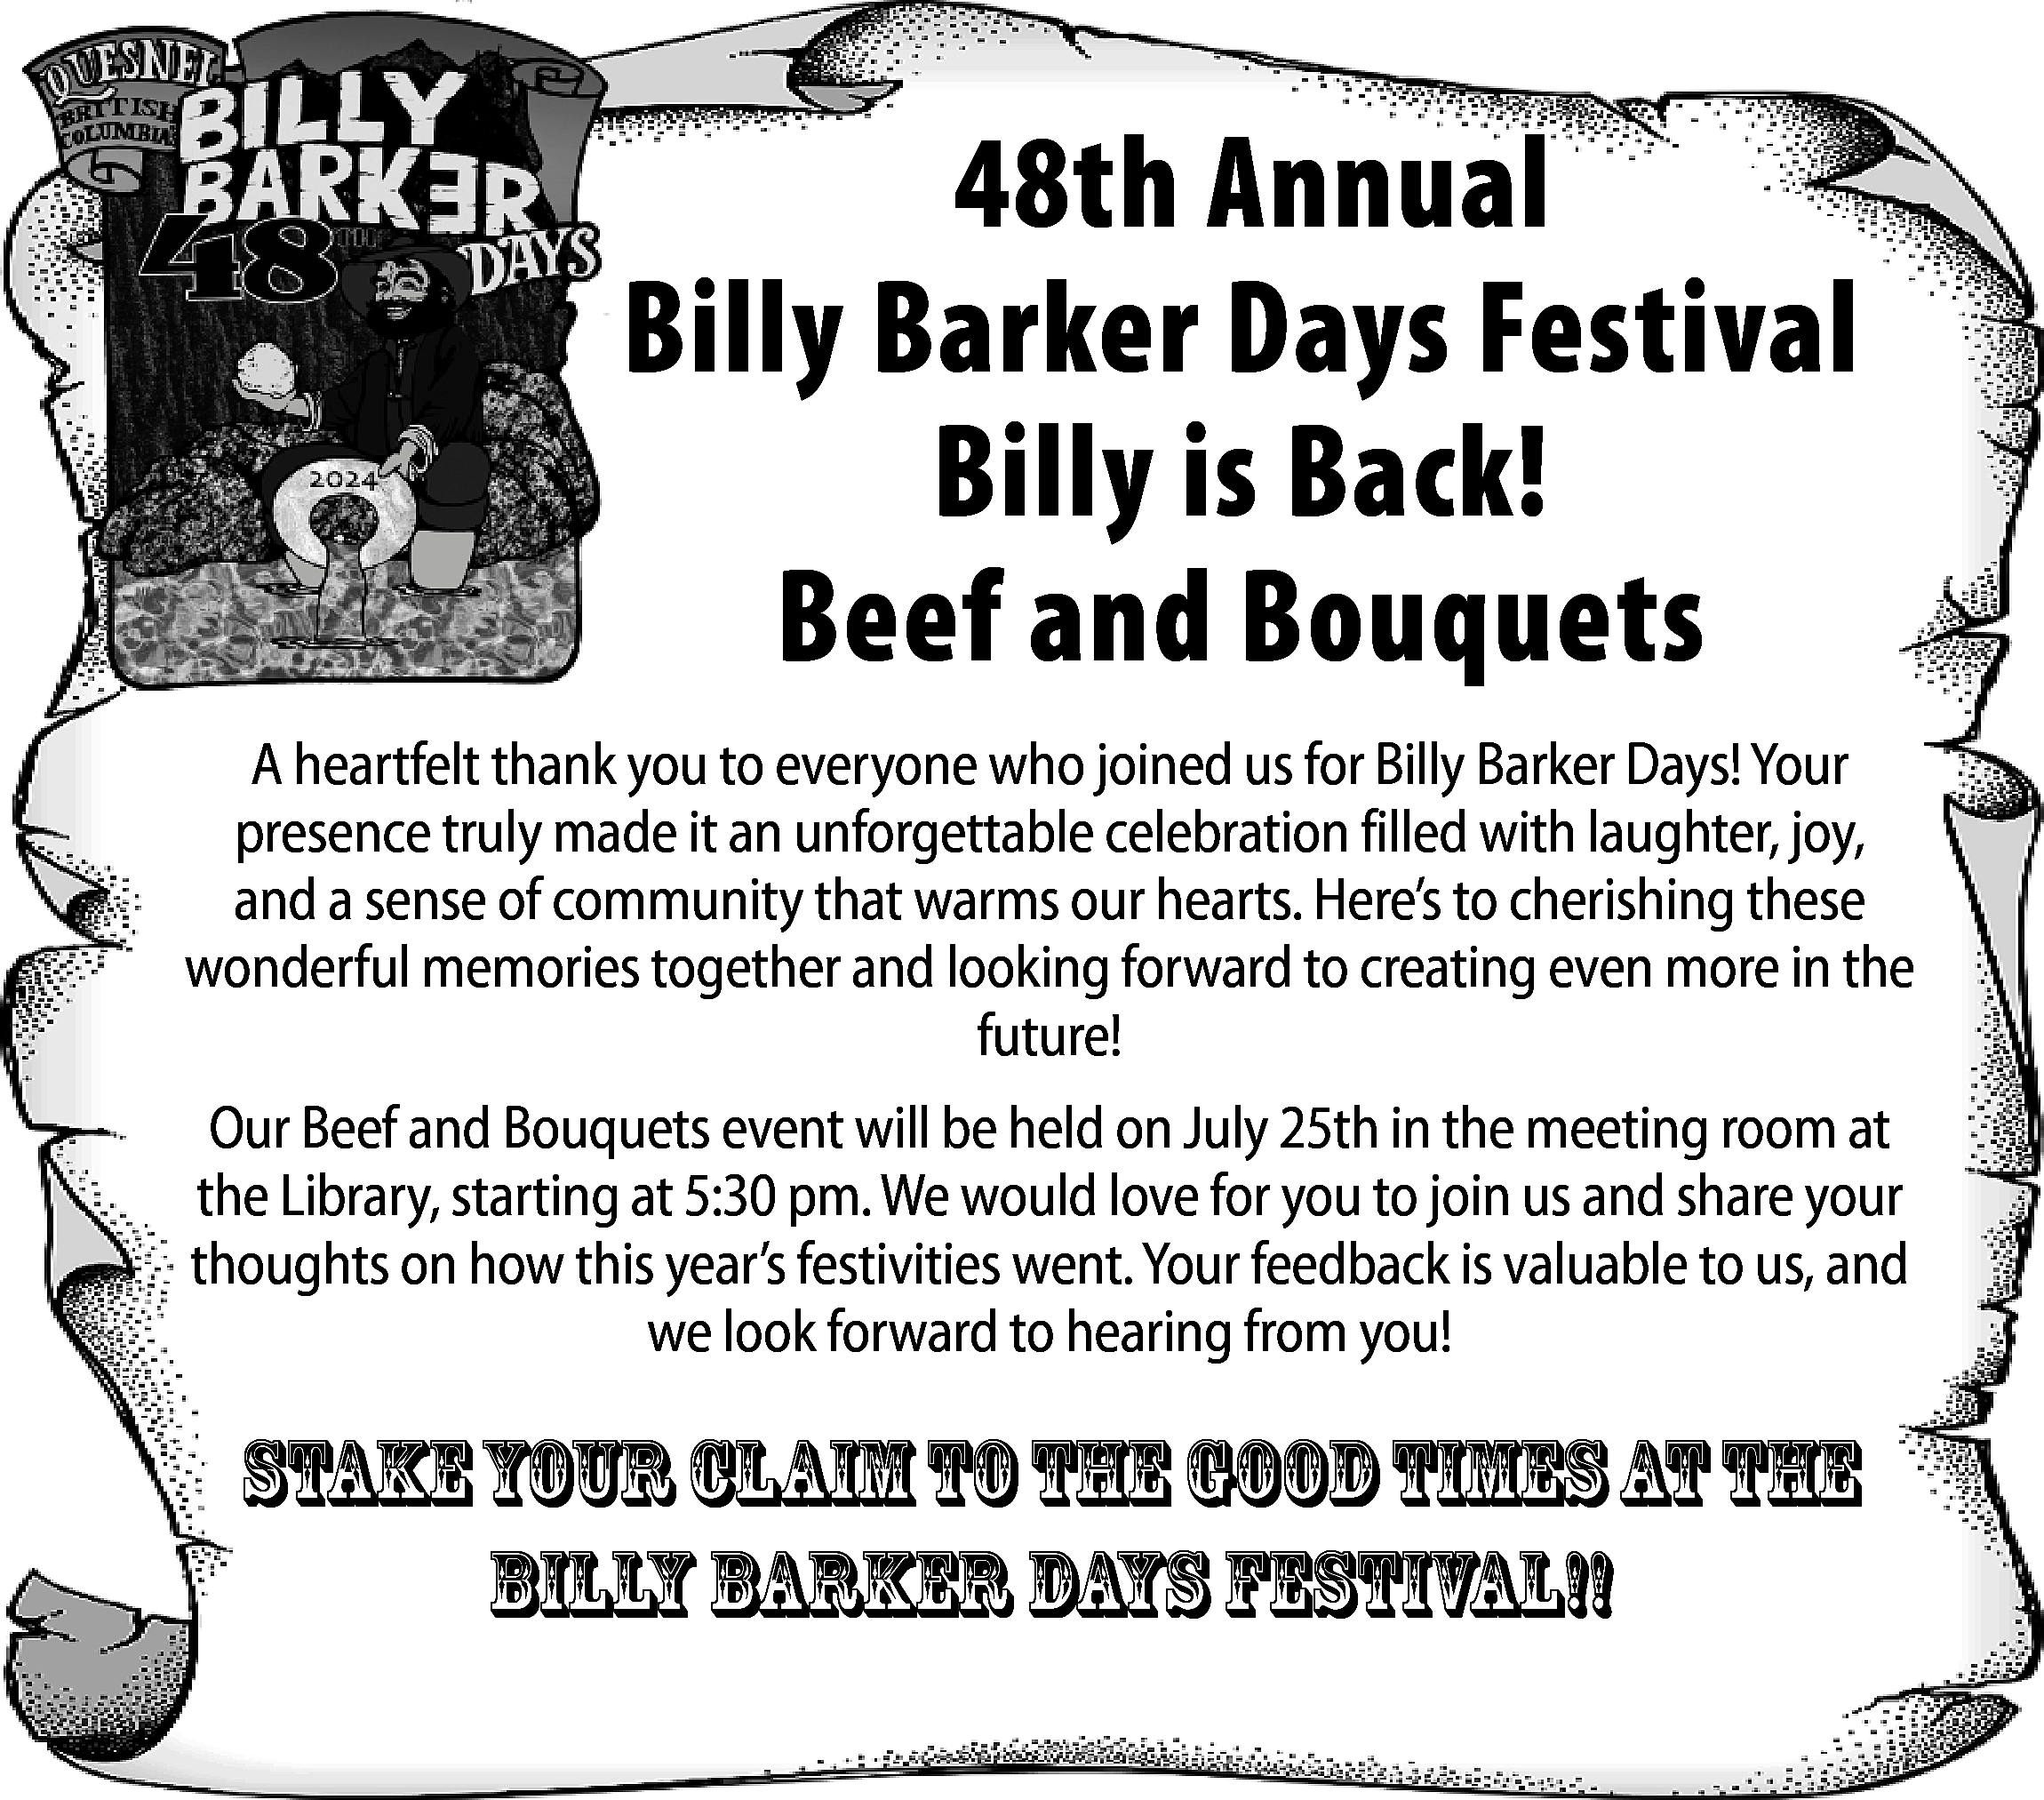 48th Annual <br>Billy Barker Days  48th Annual  Billy Barker Days Festival  Billy is Back!  Beef and Bouquets  A heartfelt thank you to everyone who joined us for Billy Barker Days! Your  presence truly made it an unforgettable celebration filled with laughter, joy,  and a sense of community that warms our hearts. Here’s to cherishing these  wonderful memories together and looking forward to creating even more in the  future!  Our Beef and Bouquets event will be held on July 25th in the meeting room at  the Library, starting at 5:30 pm. We would love for you to join us and share your  thoughts on how this year’s festivities went. Your feedback is valuable to us, and  we look forward to hearing from you!    StakeYour Claim to the Good Times at the  Billy barker days festival!!    